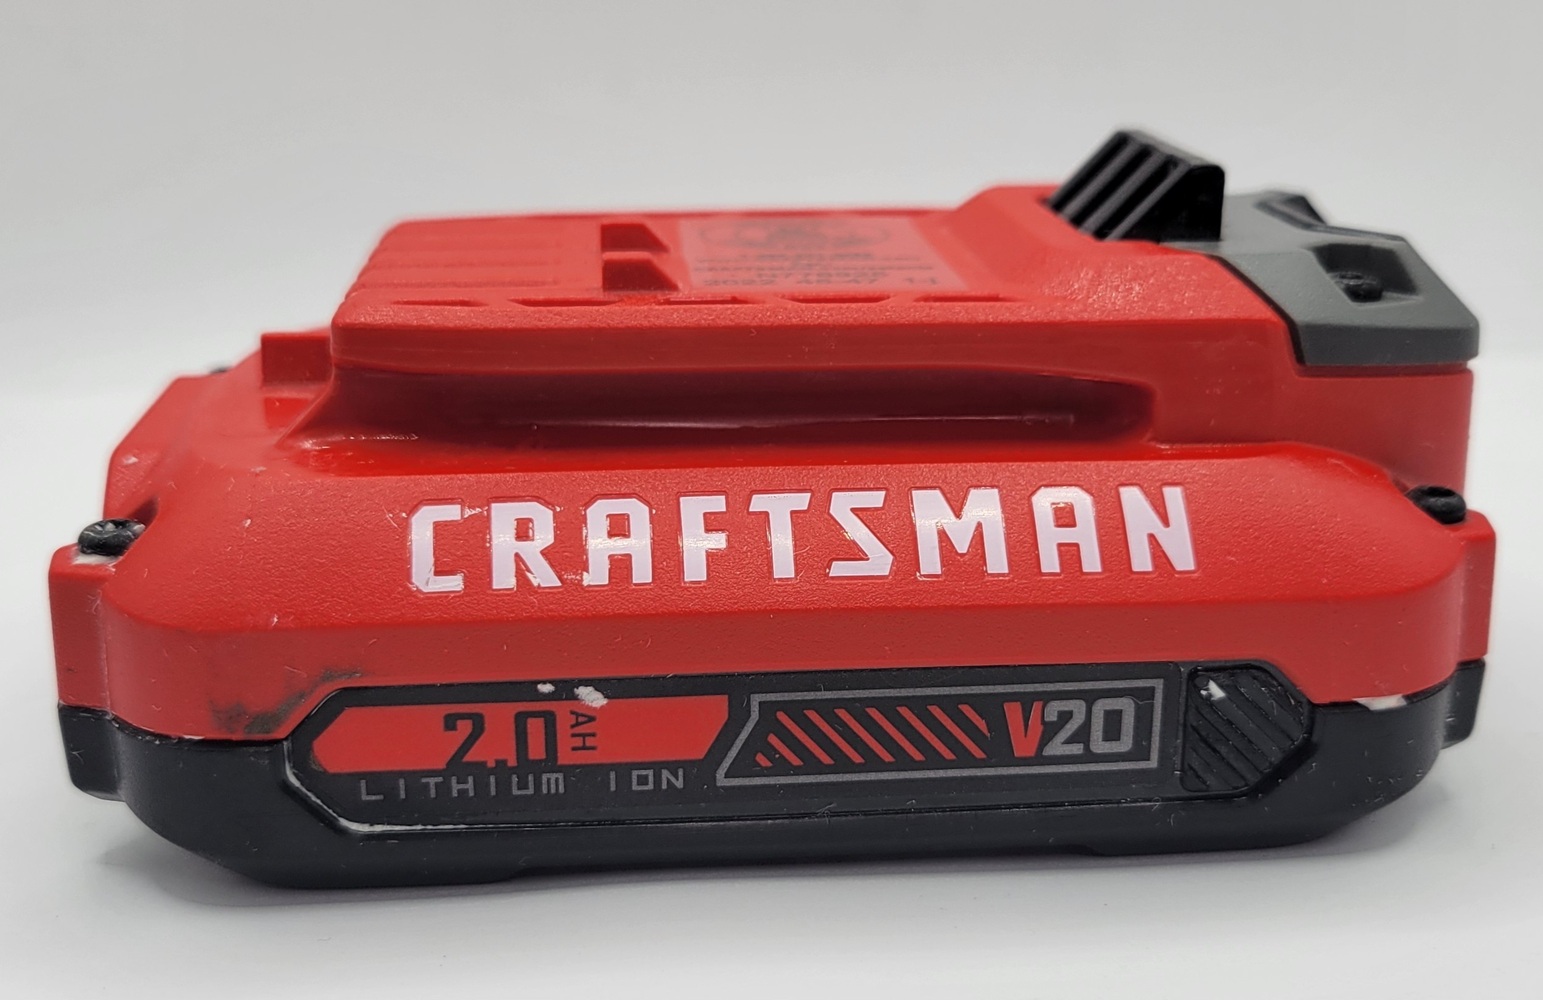 Craftsman 20V Variable Speed Jigsaw & 2.0AH Lithium Ion Battery